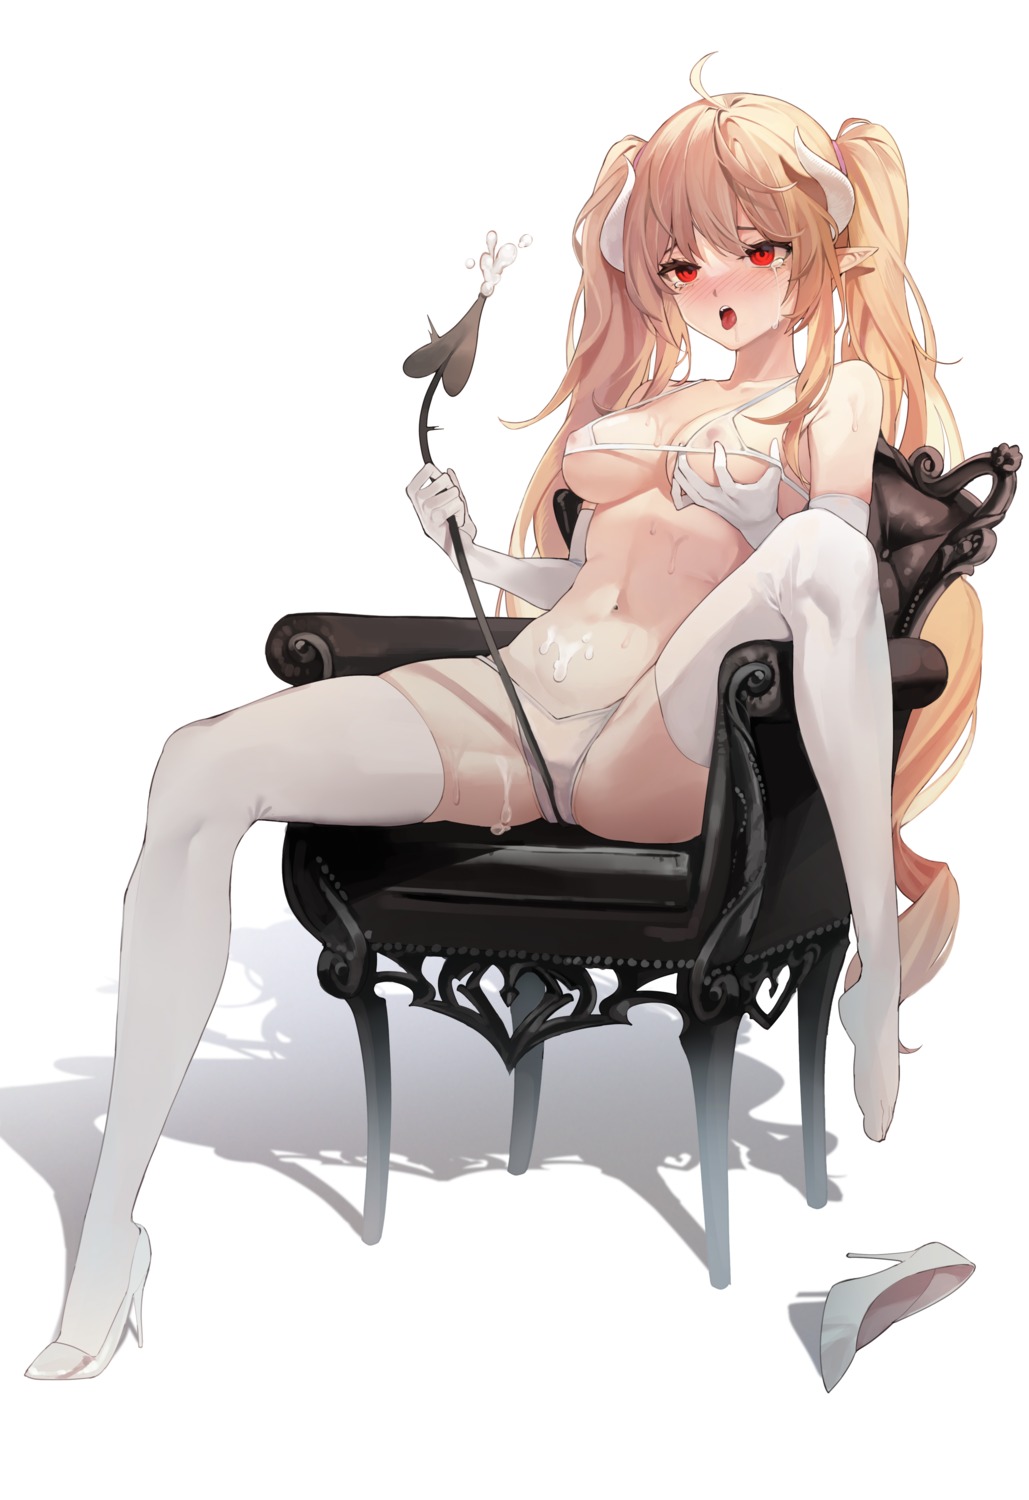 bra chukibabo2 dungeon_fighter horns pantsu tail thighhighs